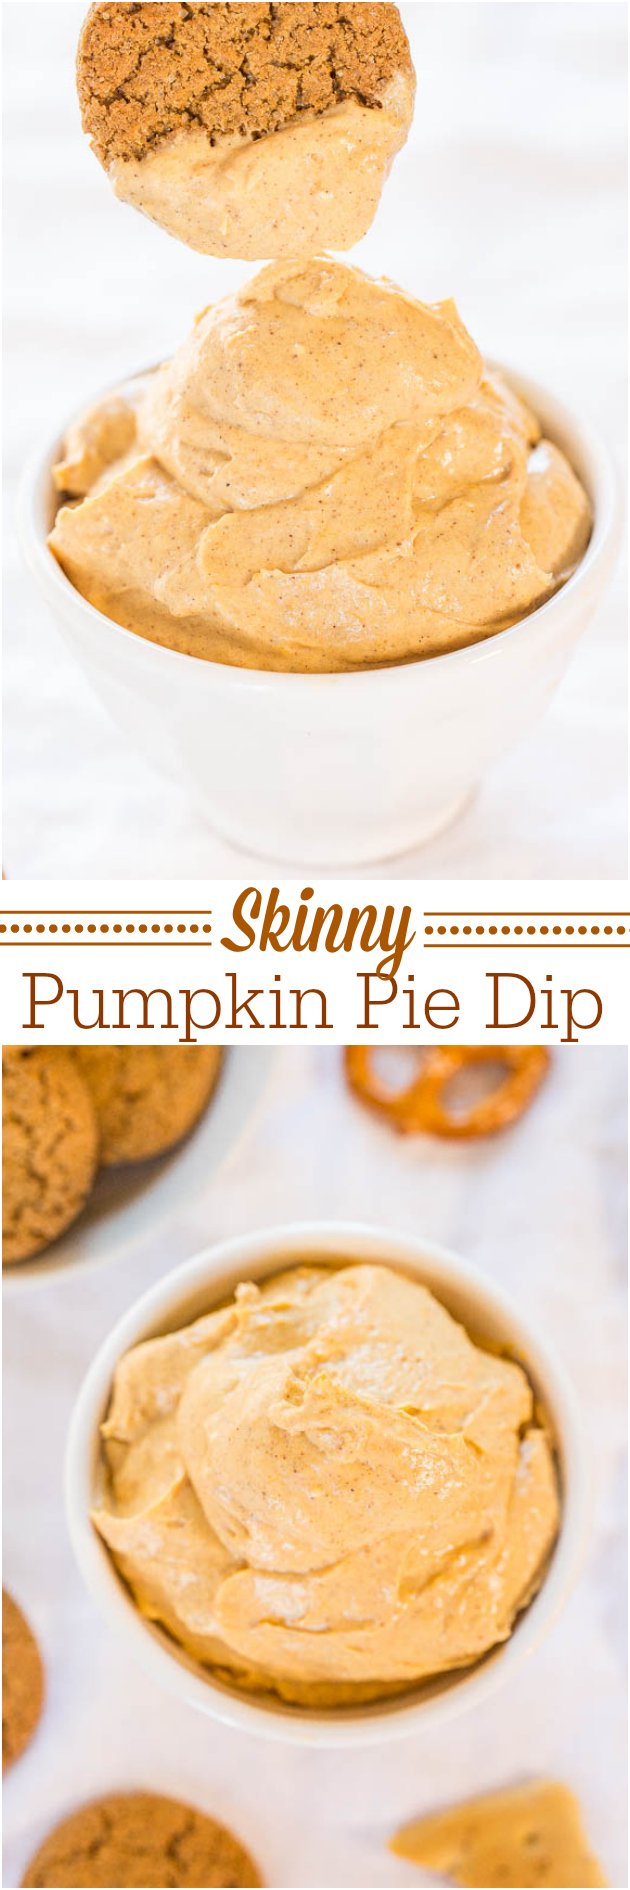 Skinny Pumpkin Pie Dip - With only 54 calories per serving, you can indulge in the flavor of pumpkin pie totally guilt-free!! Super easy!!